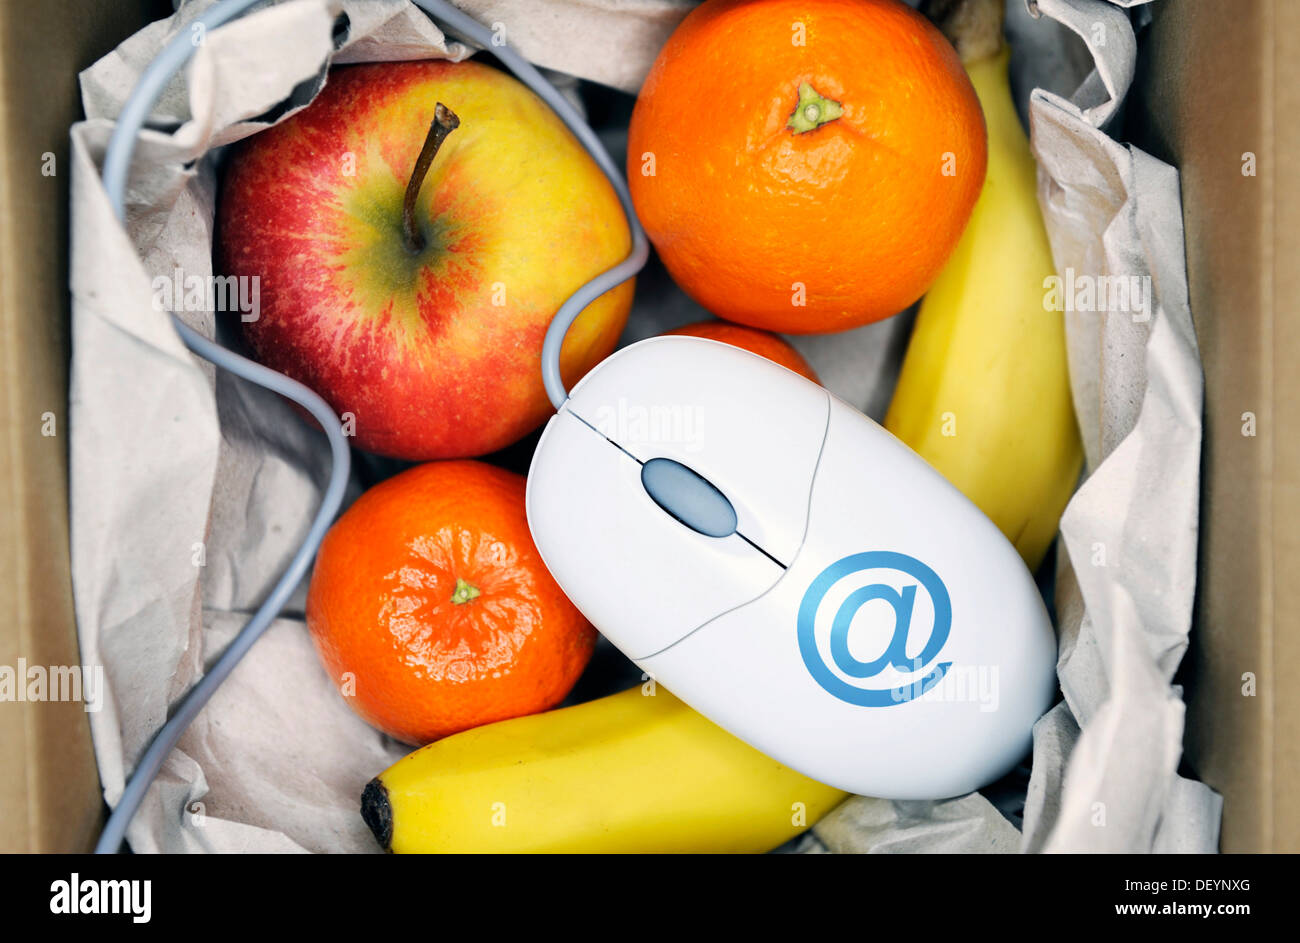 Parcel with fruit and a computer mouse, symbolic image for online grocery shopping Stock Photo